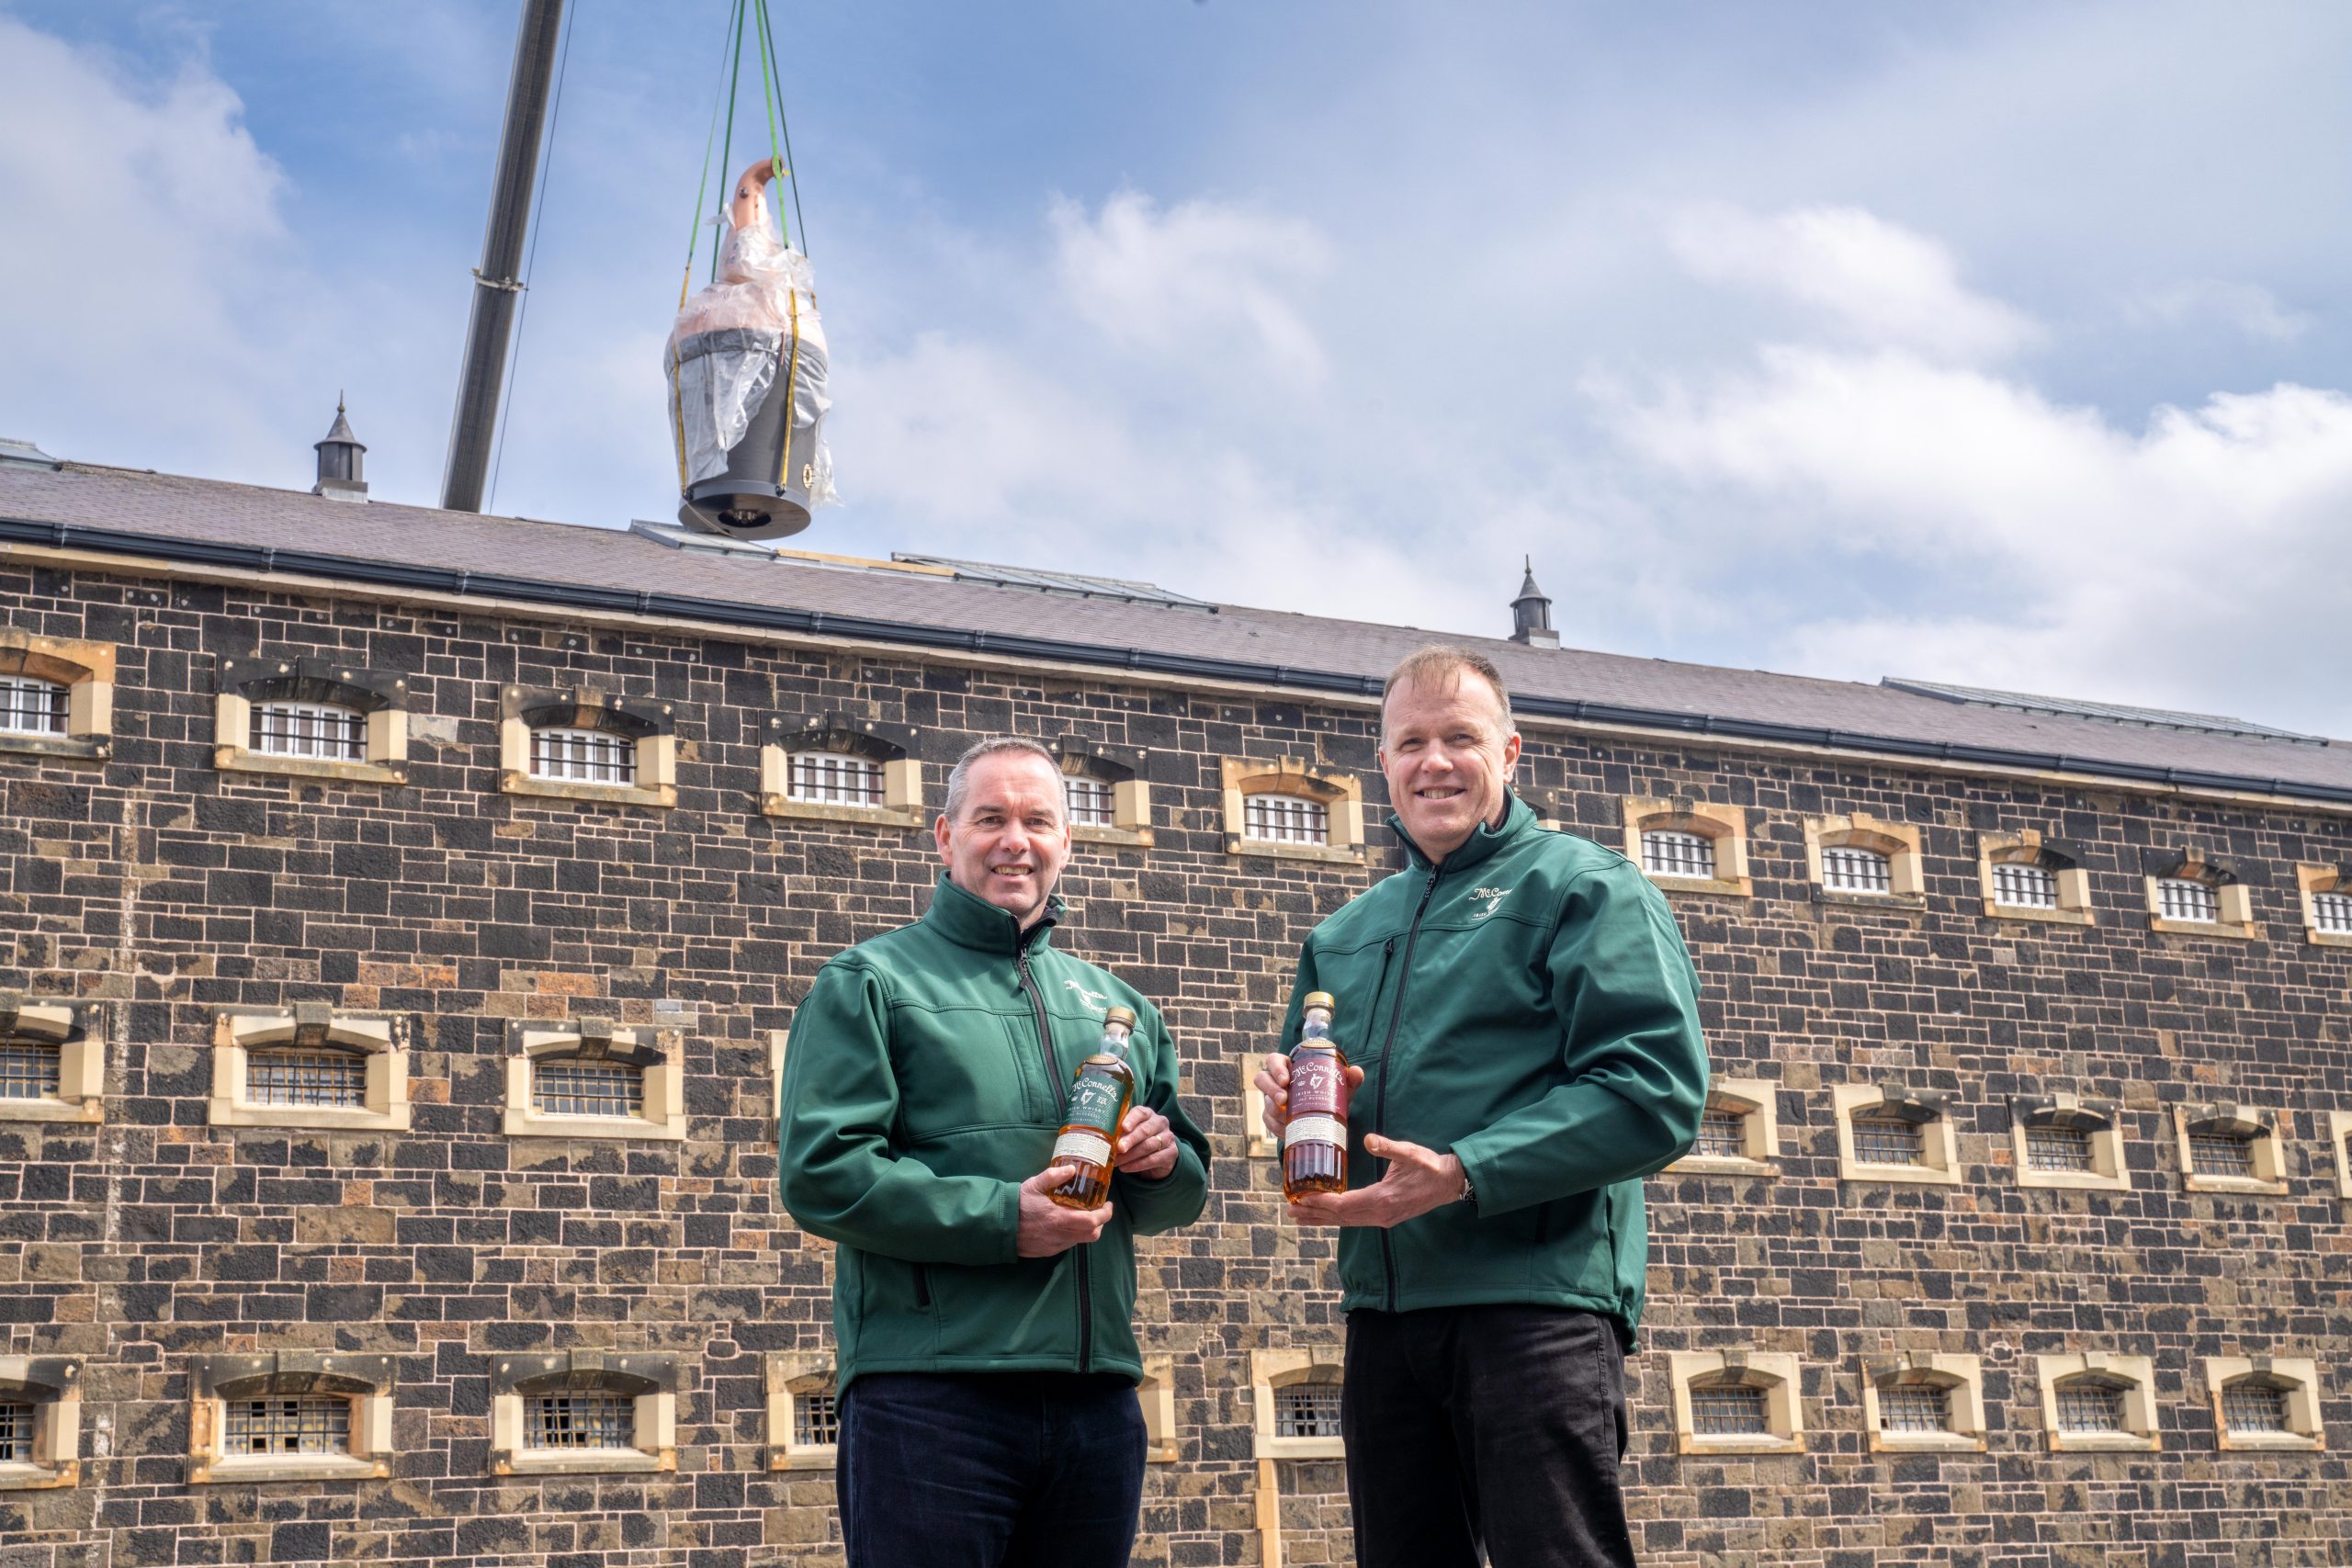 Belfast Distillery Company welcome arrival of stills to Crumlin Road Gaol